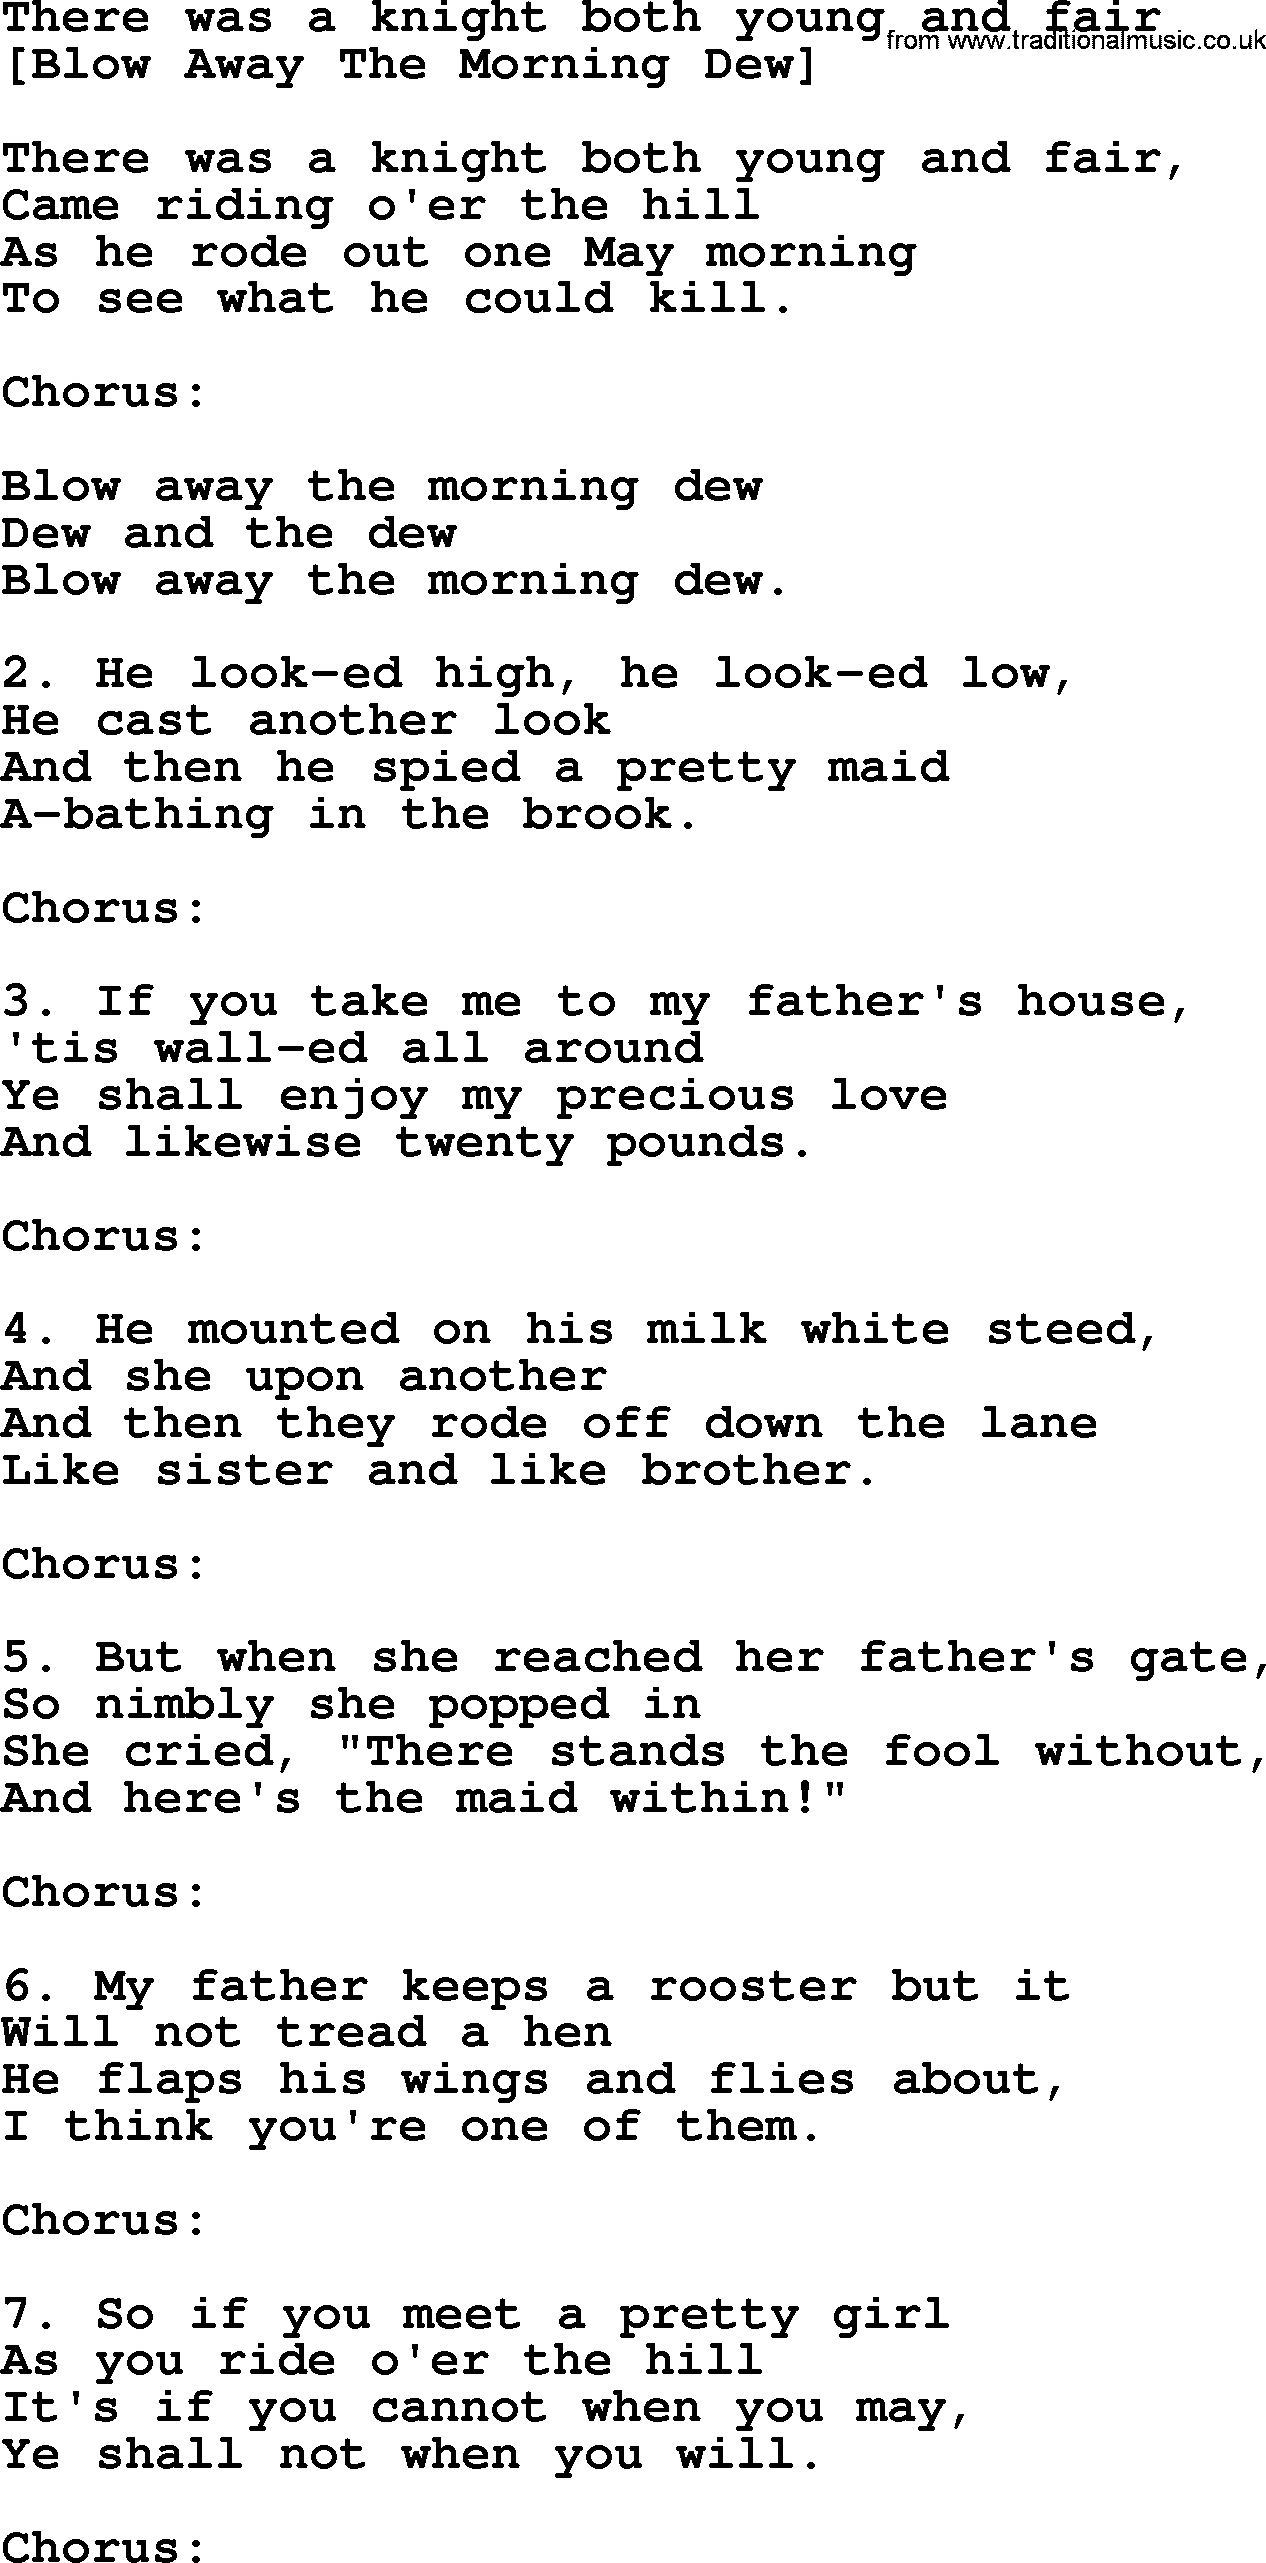 Old English Song: There Was A Knight Both Young And Fair lyrics